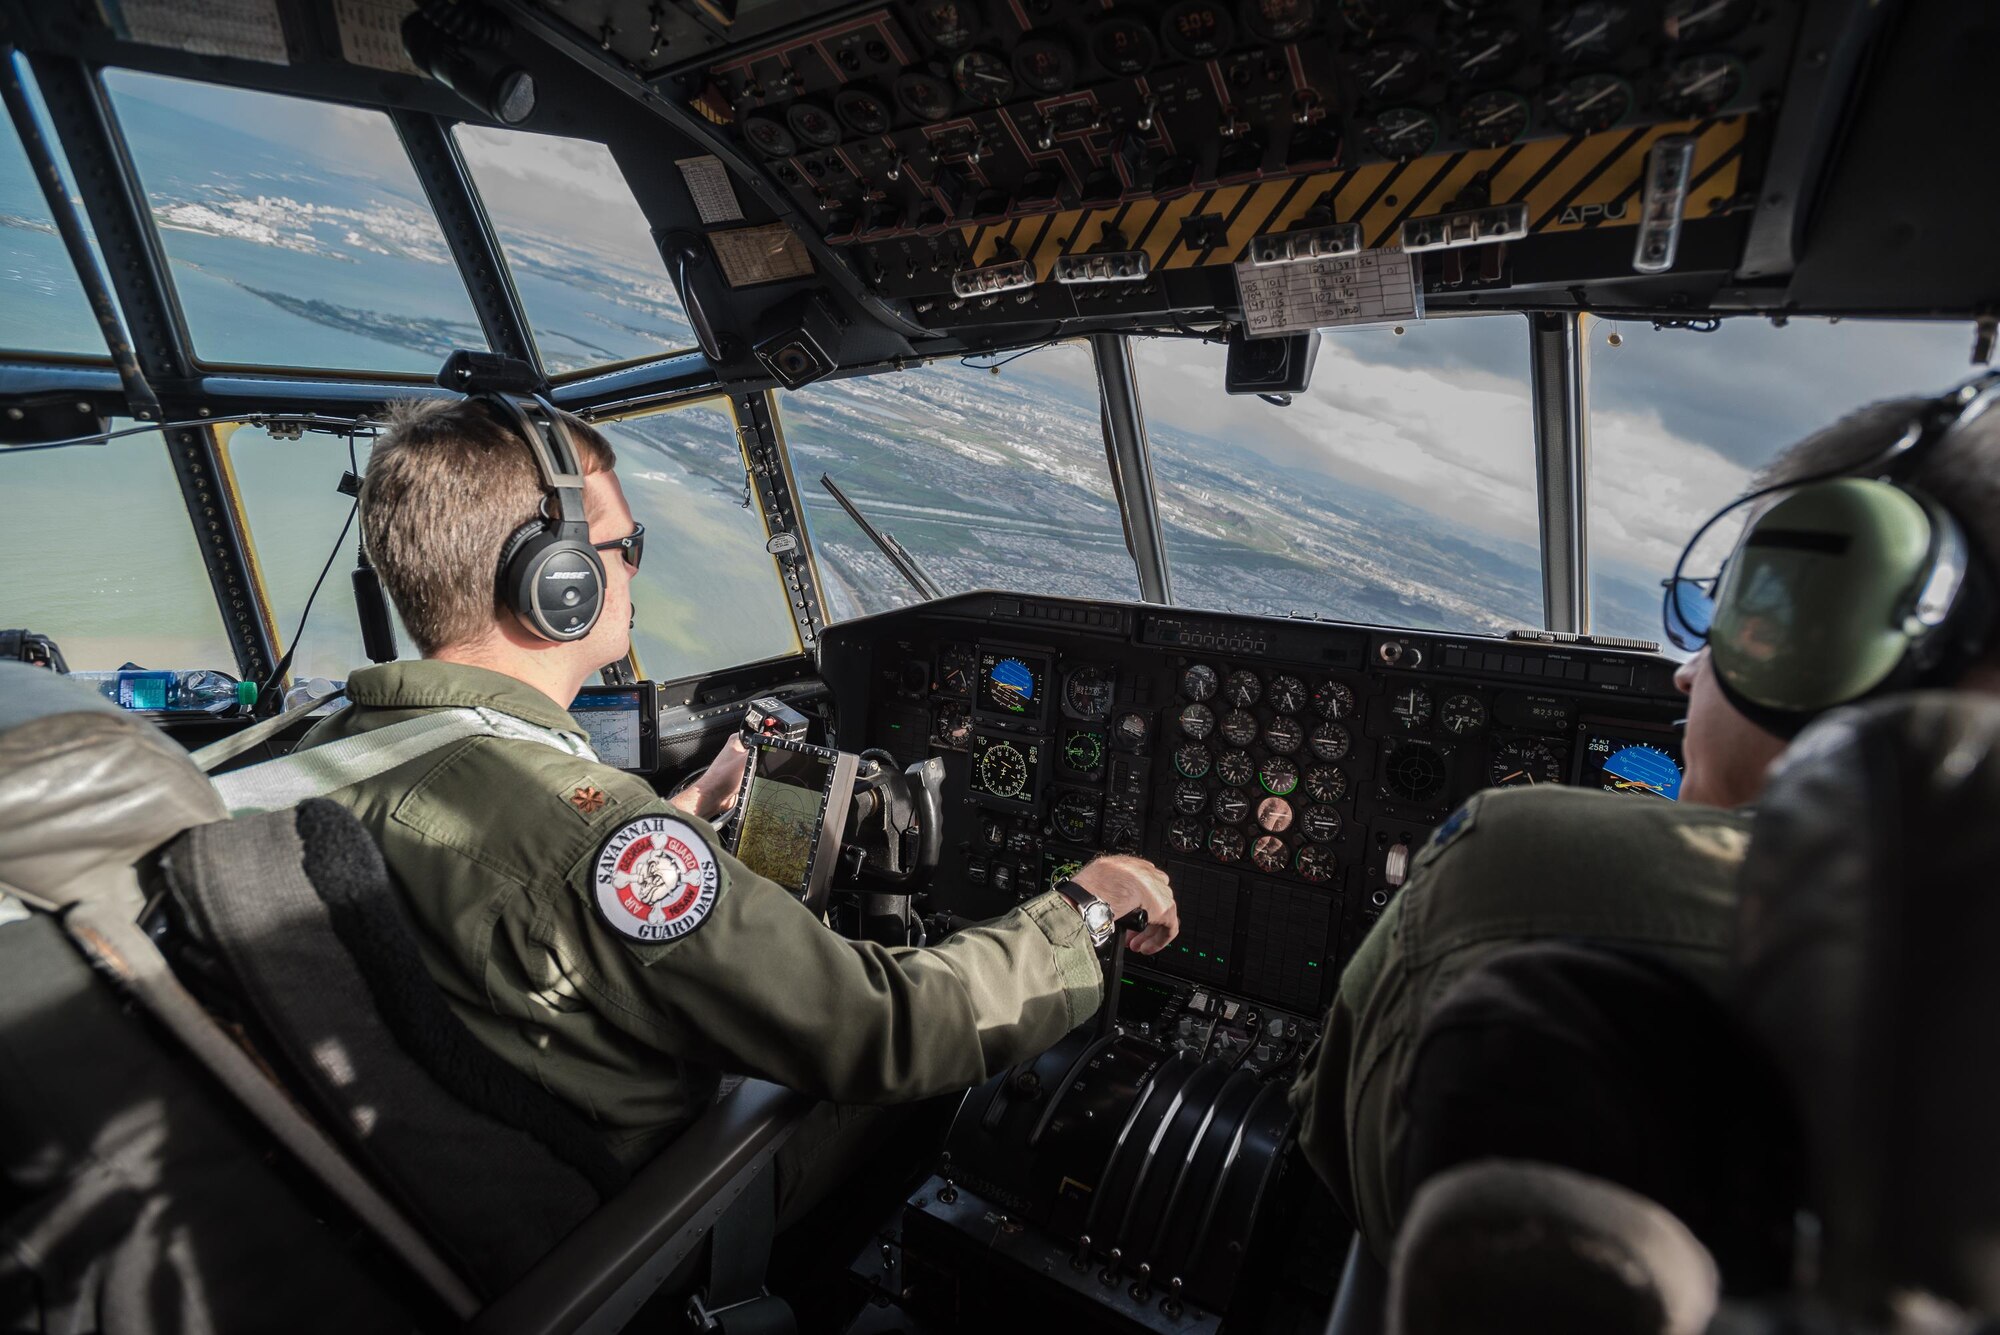 A C-130 aircrew from the Georgia Air National Guard’s 165th Airlift Wing approaches Puerto Rico with a load of humanitarian aid being flown from Savannah, Ga., to Luis Muñoz Marín International Airport in San Juan on Oct. 5, 2017. The cargo will be downloaded and staged for distribution by Airmen from the Kentucky Air Guard’s 123rd Contingency Response Group as part of Hurricane Maria recovery efforts. (U.S. Air National Guard photo by Lt. Col. Dale Greer)